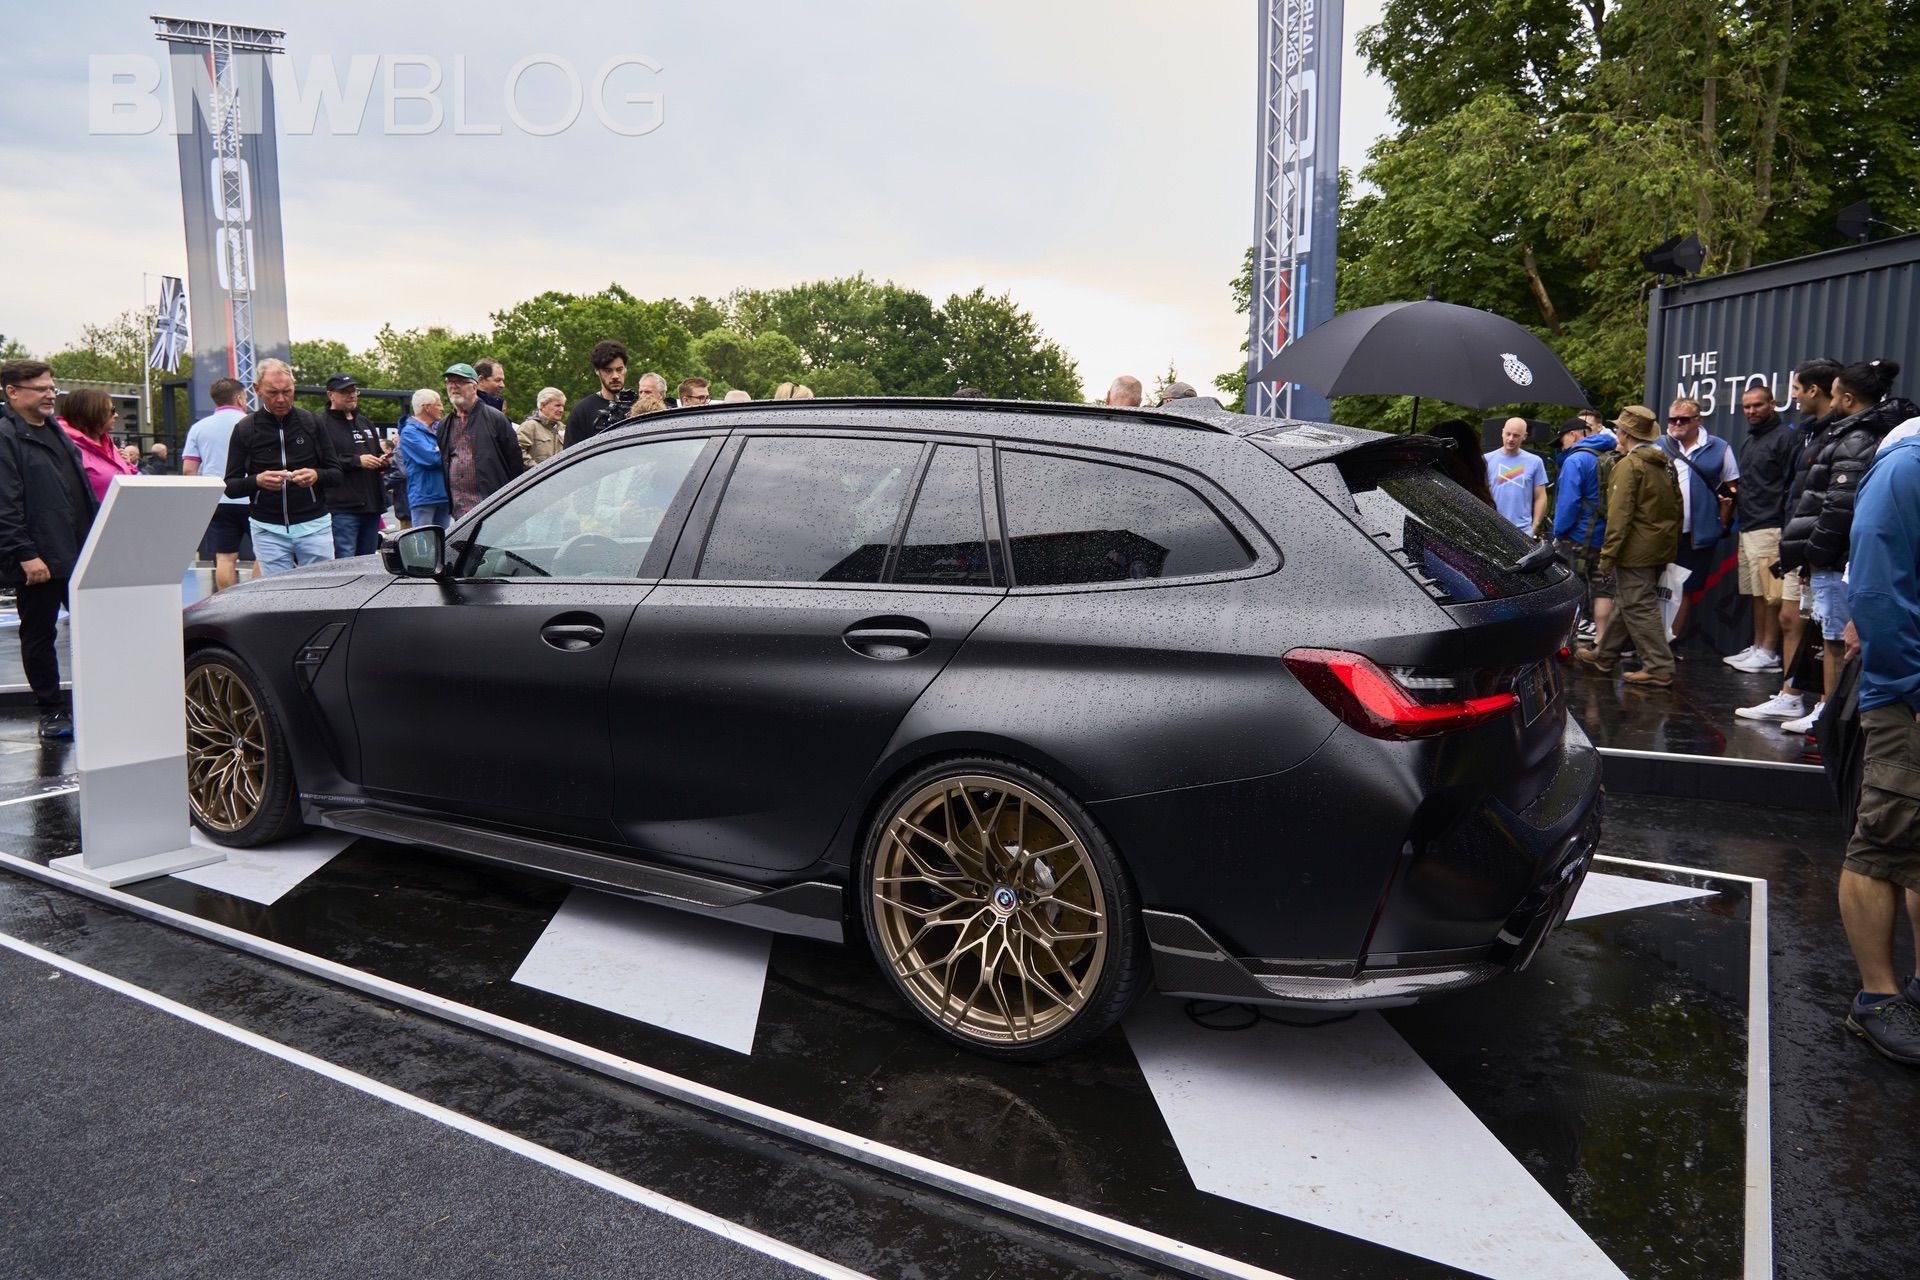 2023 BMW M3 Touring: See Live Image From The Goodwood FoS